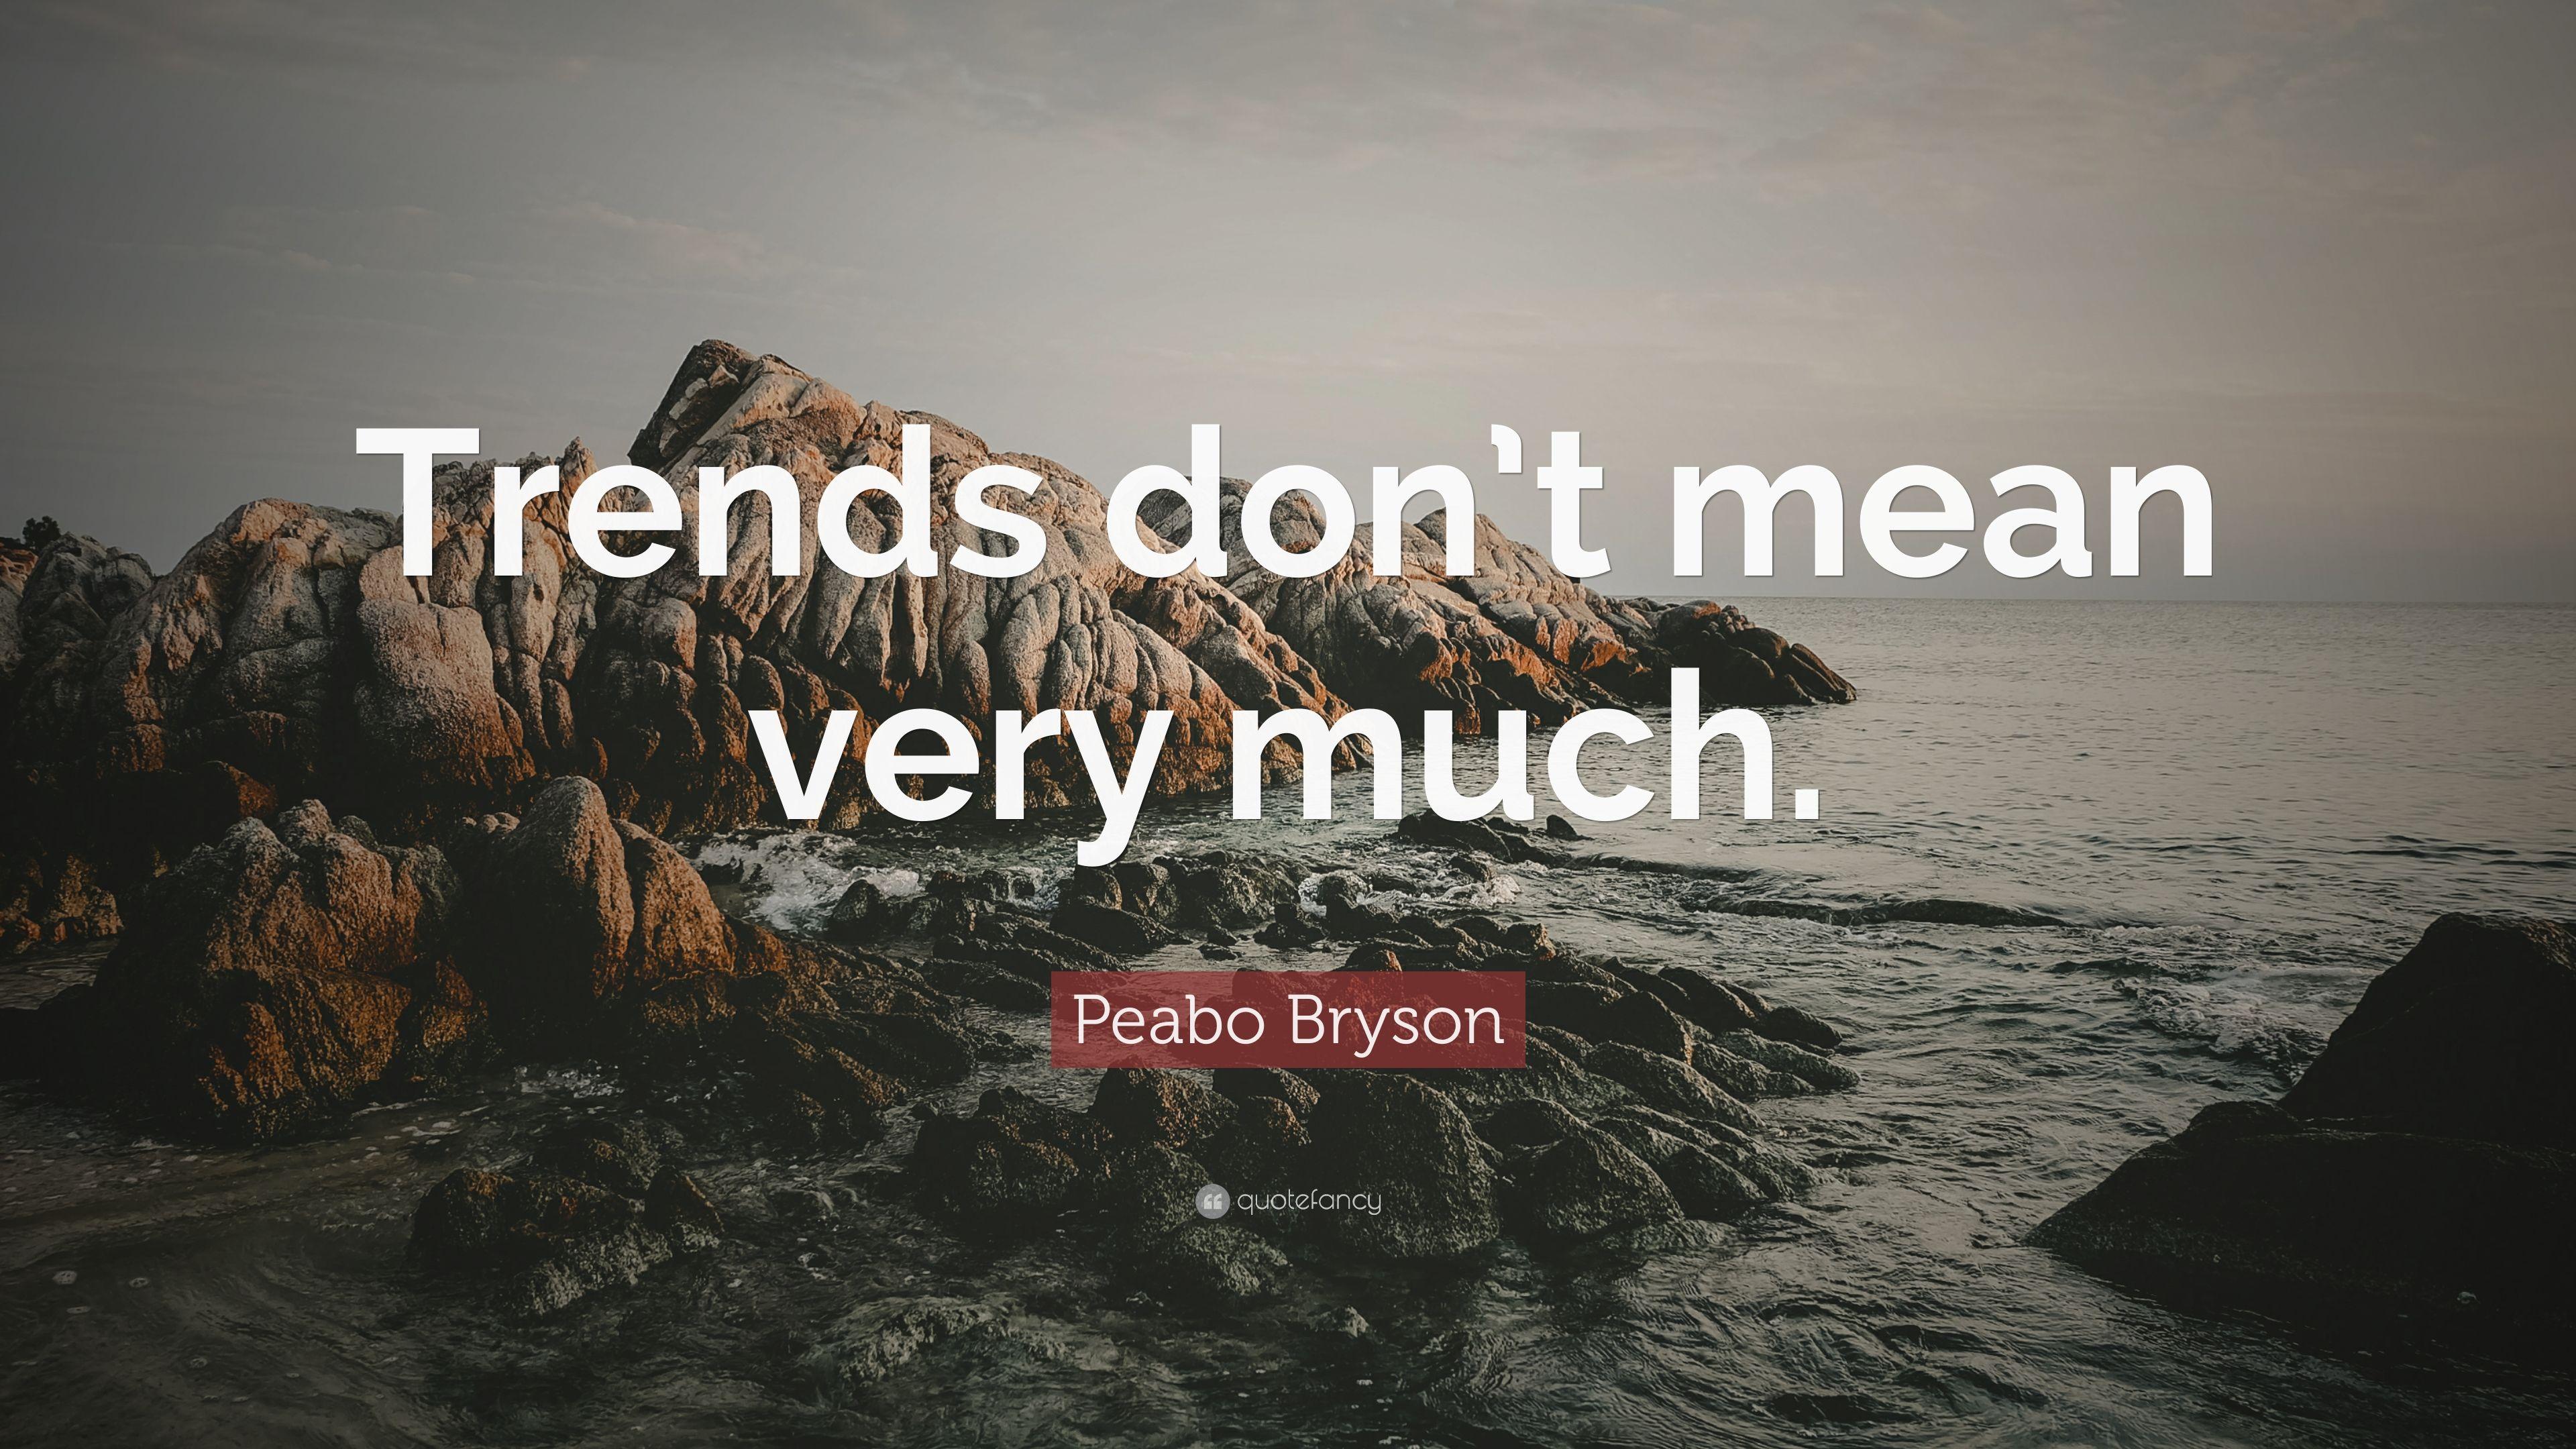 Peabo Bryson Quote: “Trends don't mean very much.” 7 wallpaper